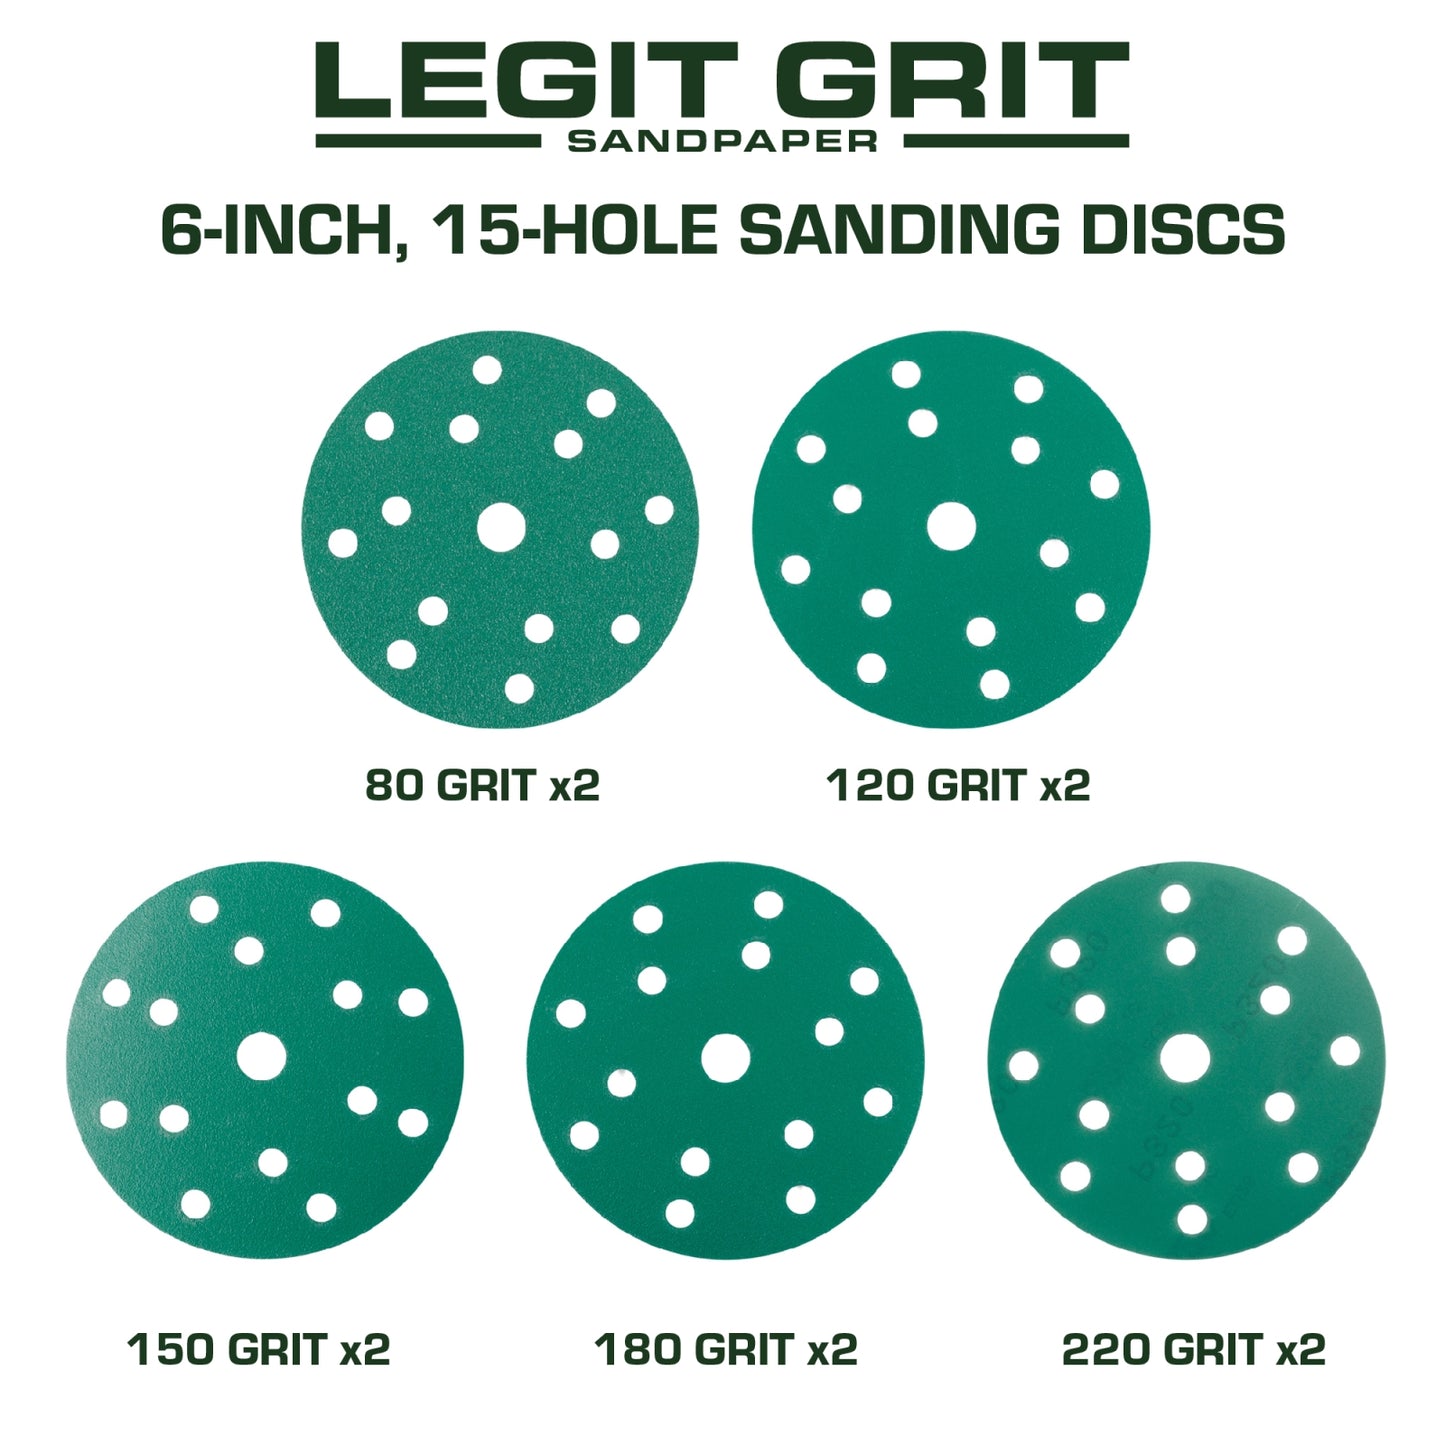 Legit Grit 6 inch Sand paper Disc, 15-Hole, Mixed - Sample Pack, GRITS: 80/120/150/180/220 (2 of each) 10 Pack